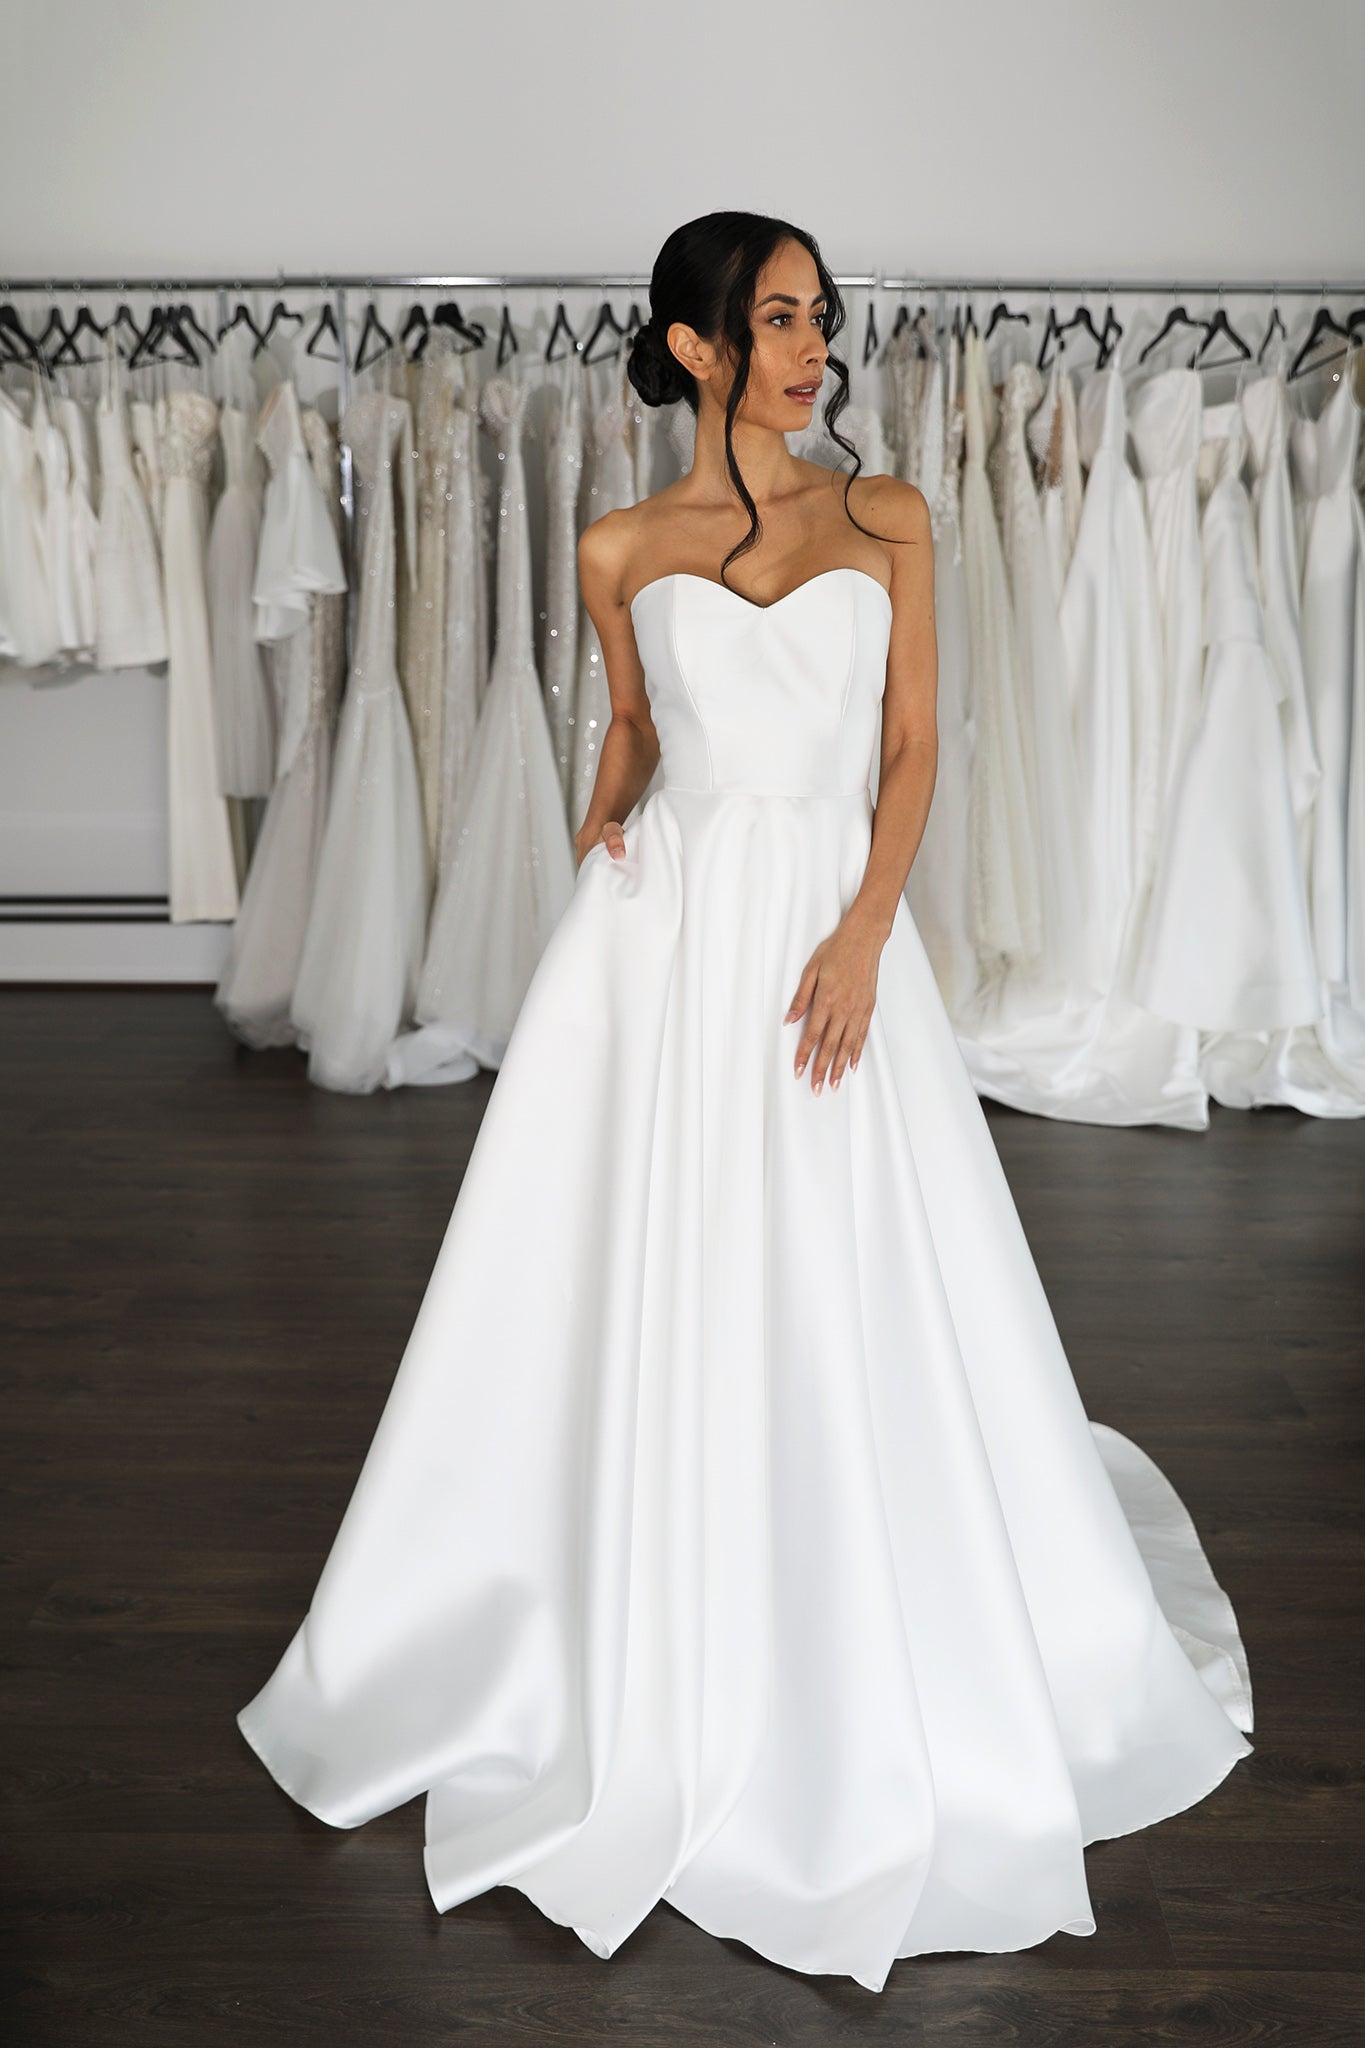 model posing in wedding gown with hand in pocket